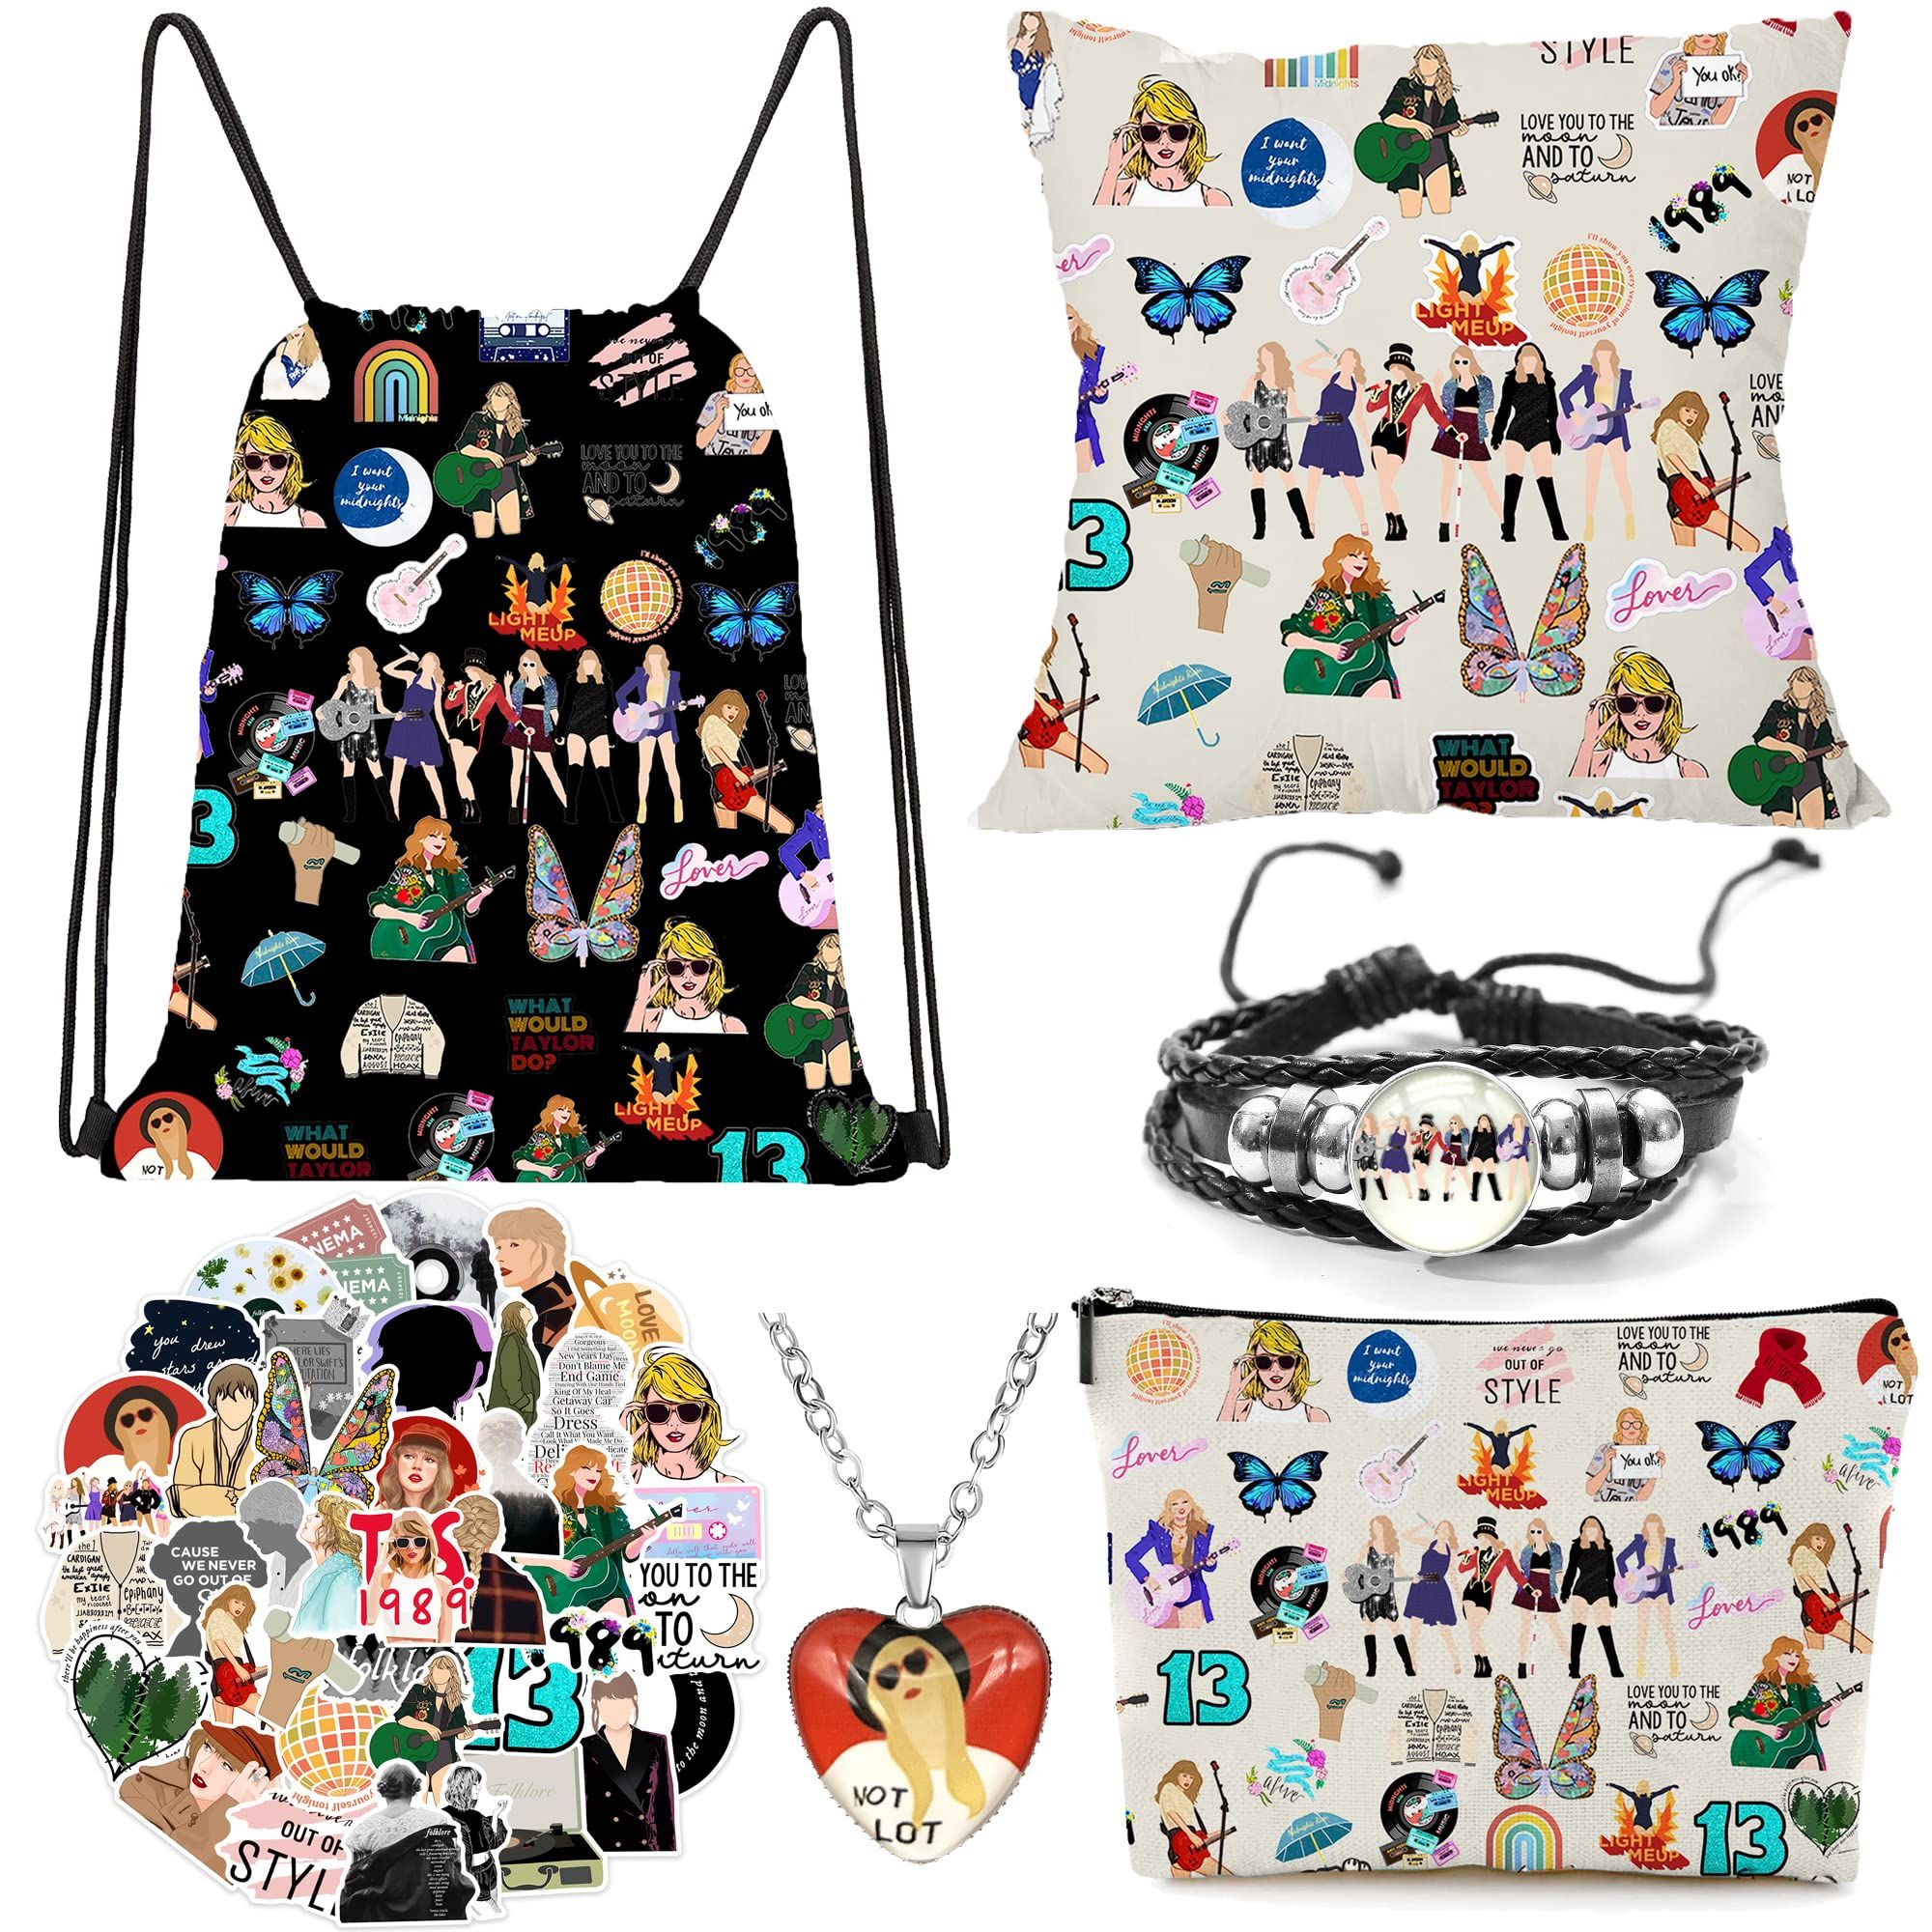 30 Must-Have Gifts for Taylor Swift Fans